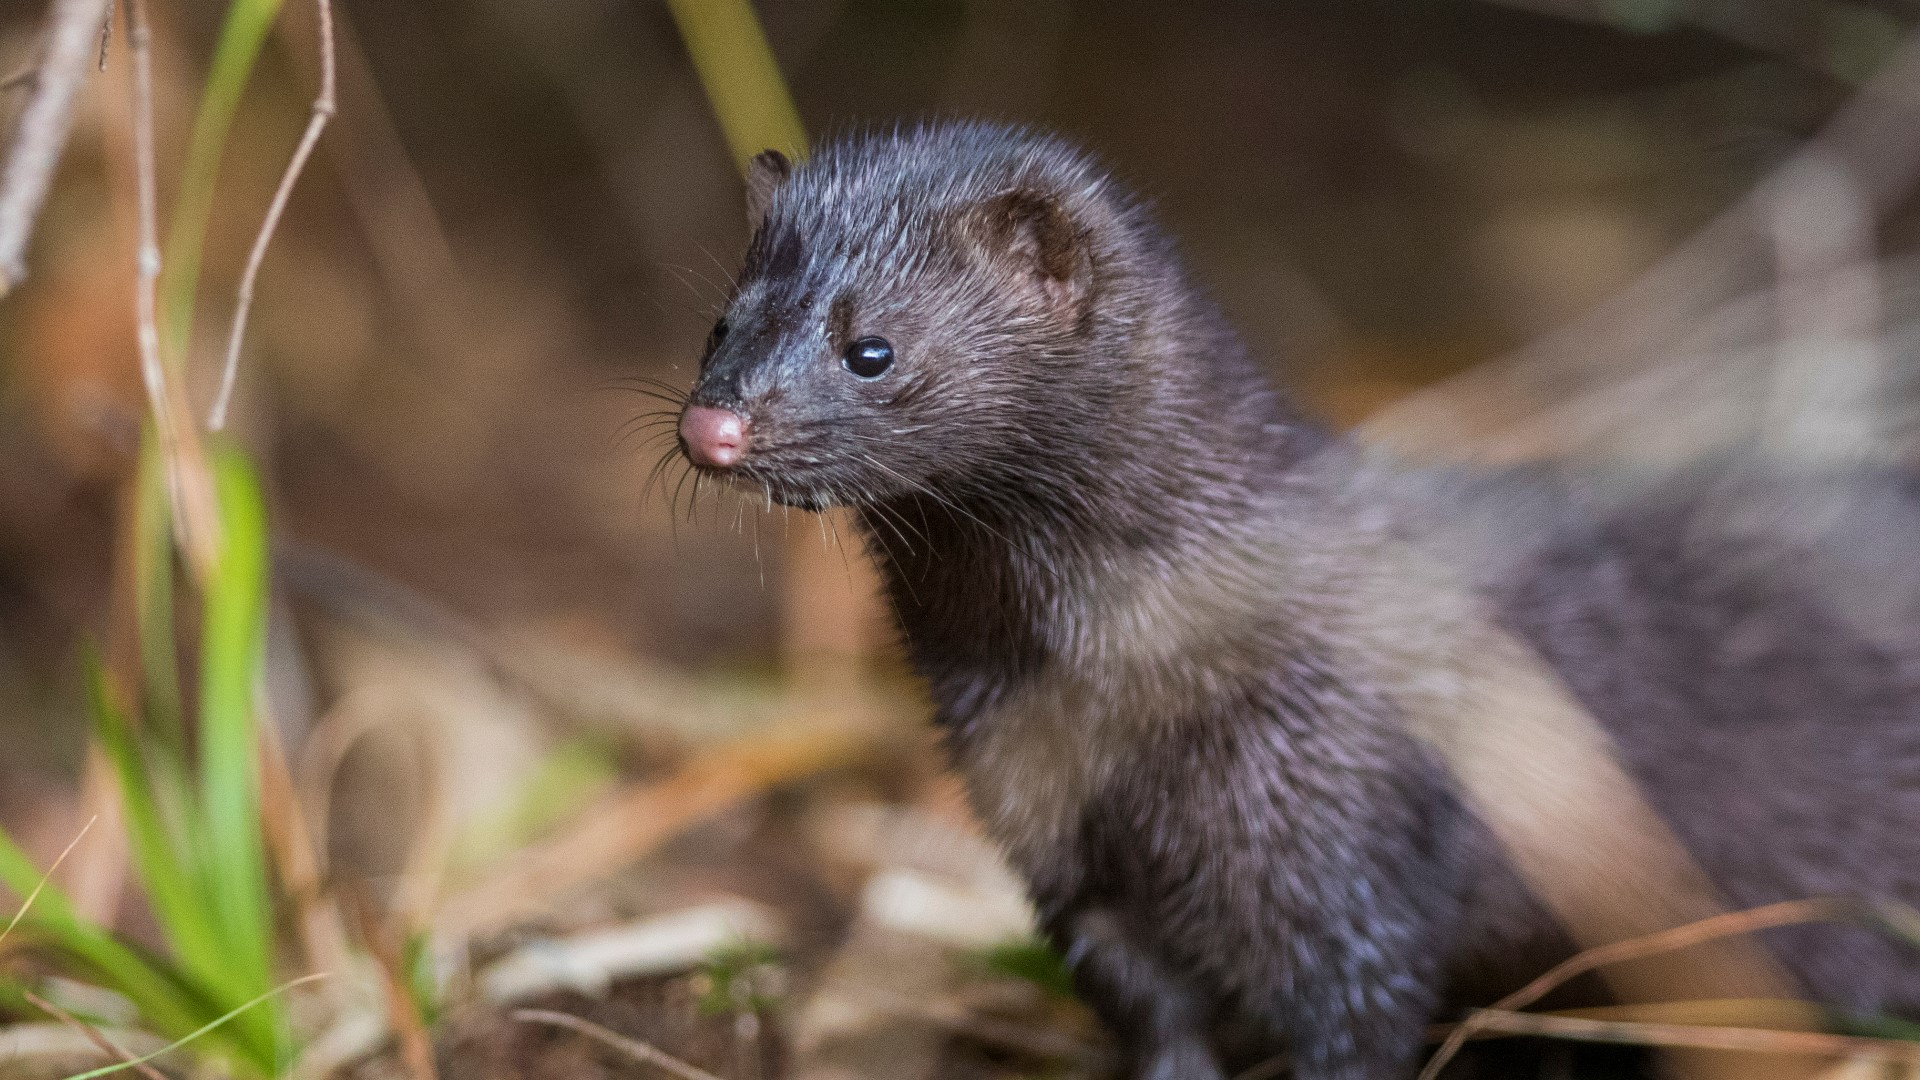 The Van Wert County Sheriff's Office said someone broke into a mink farm overnight and released up to 40,000 of the animals from their cages.